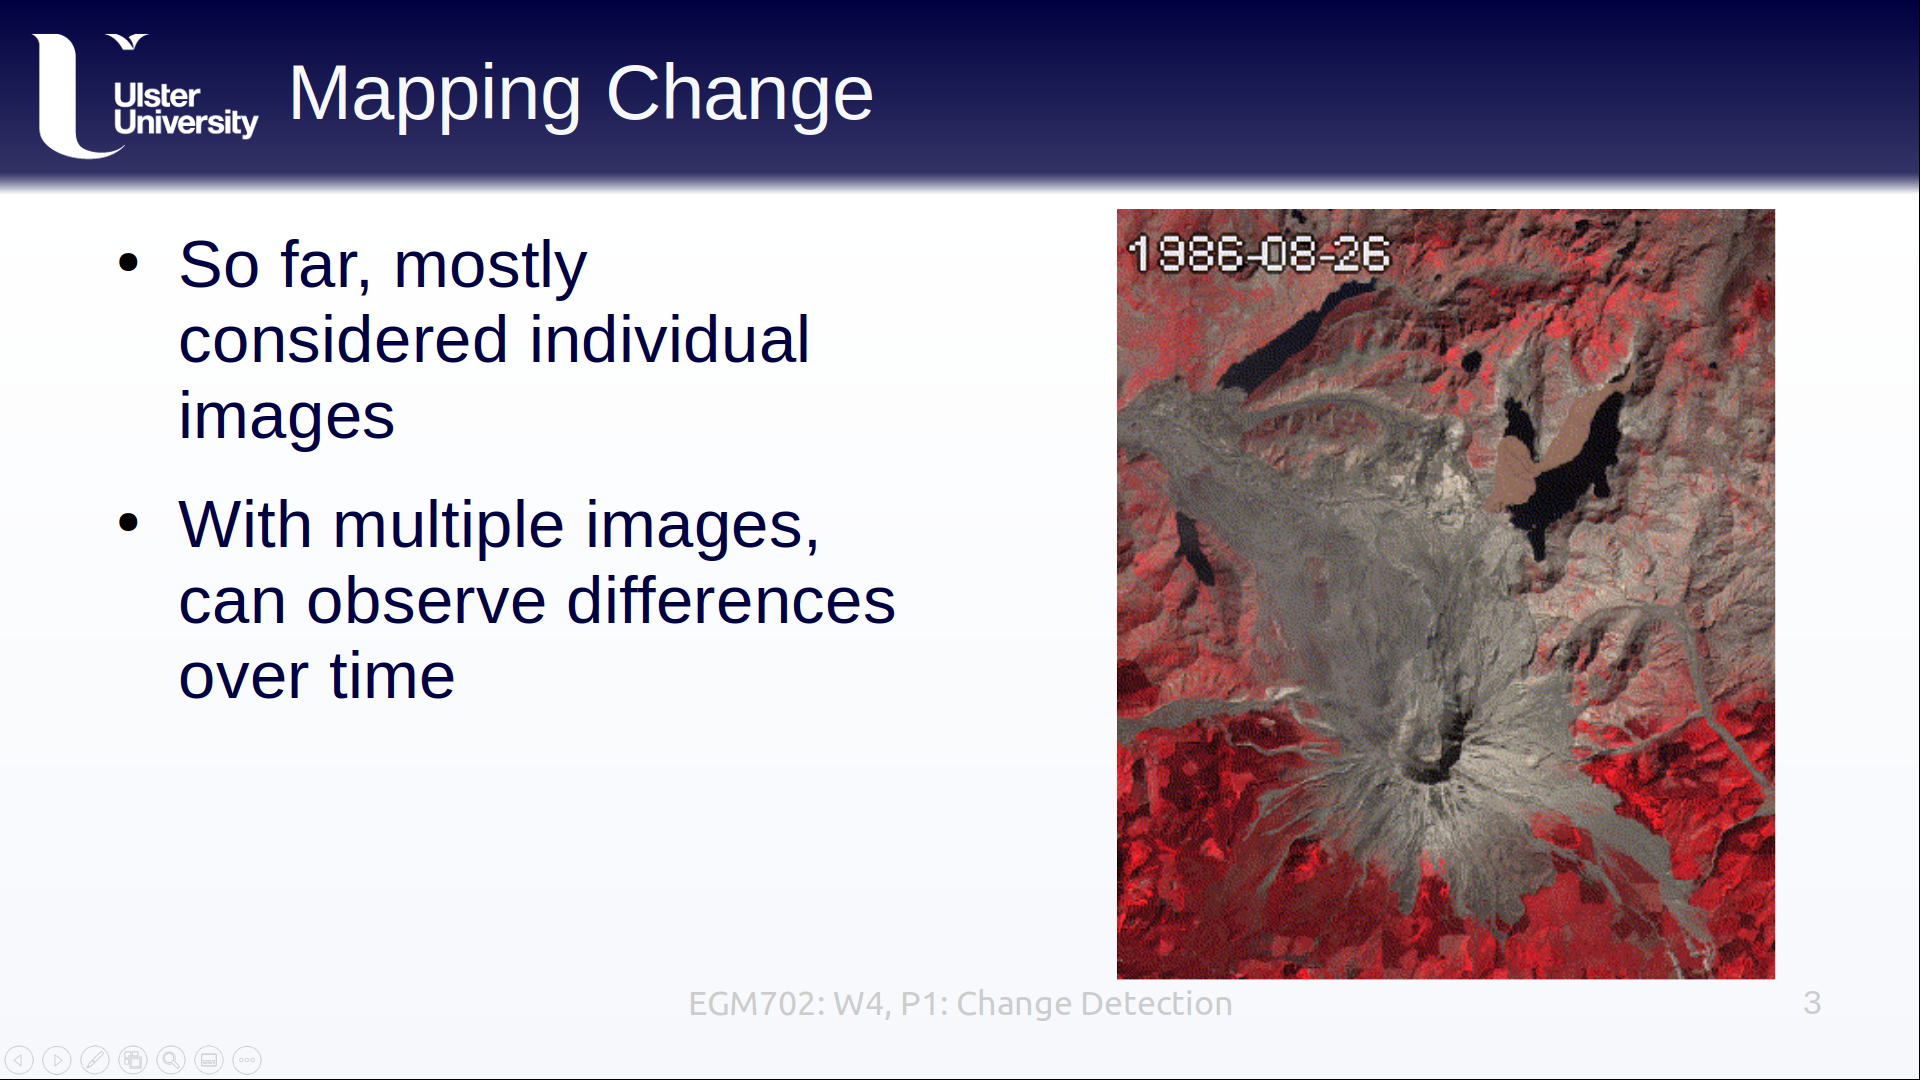 a slide explaining how with multiple images over time, we can map change